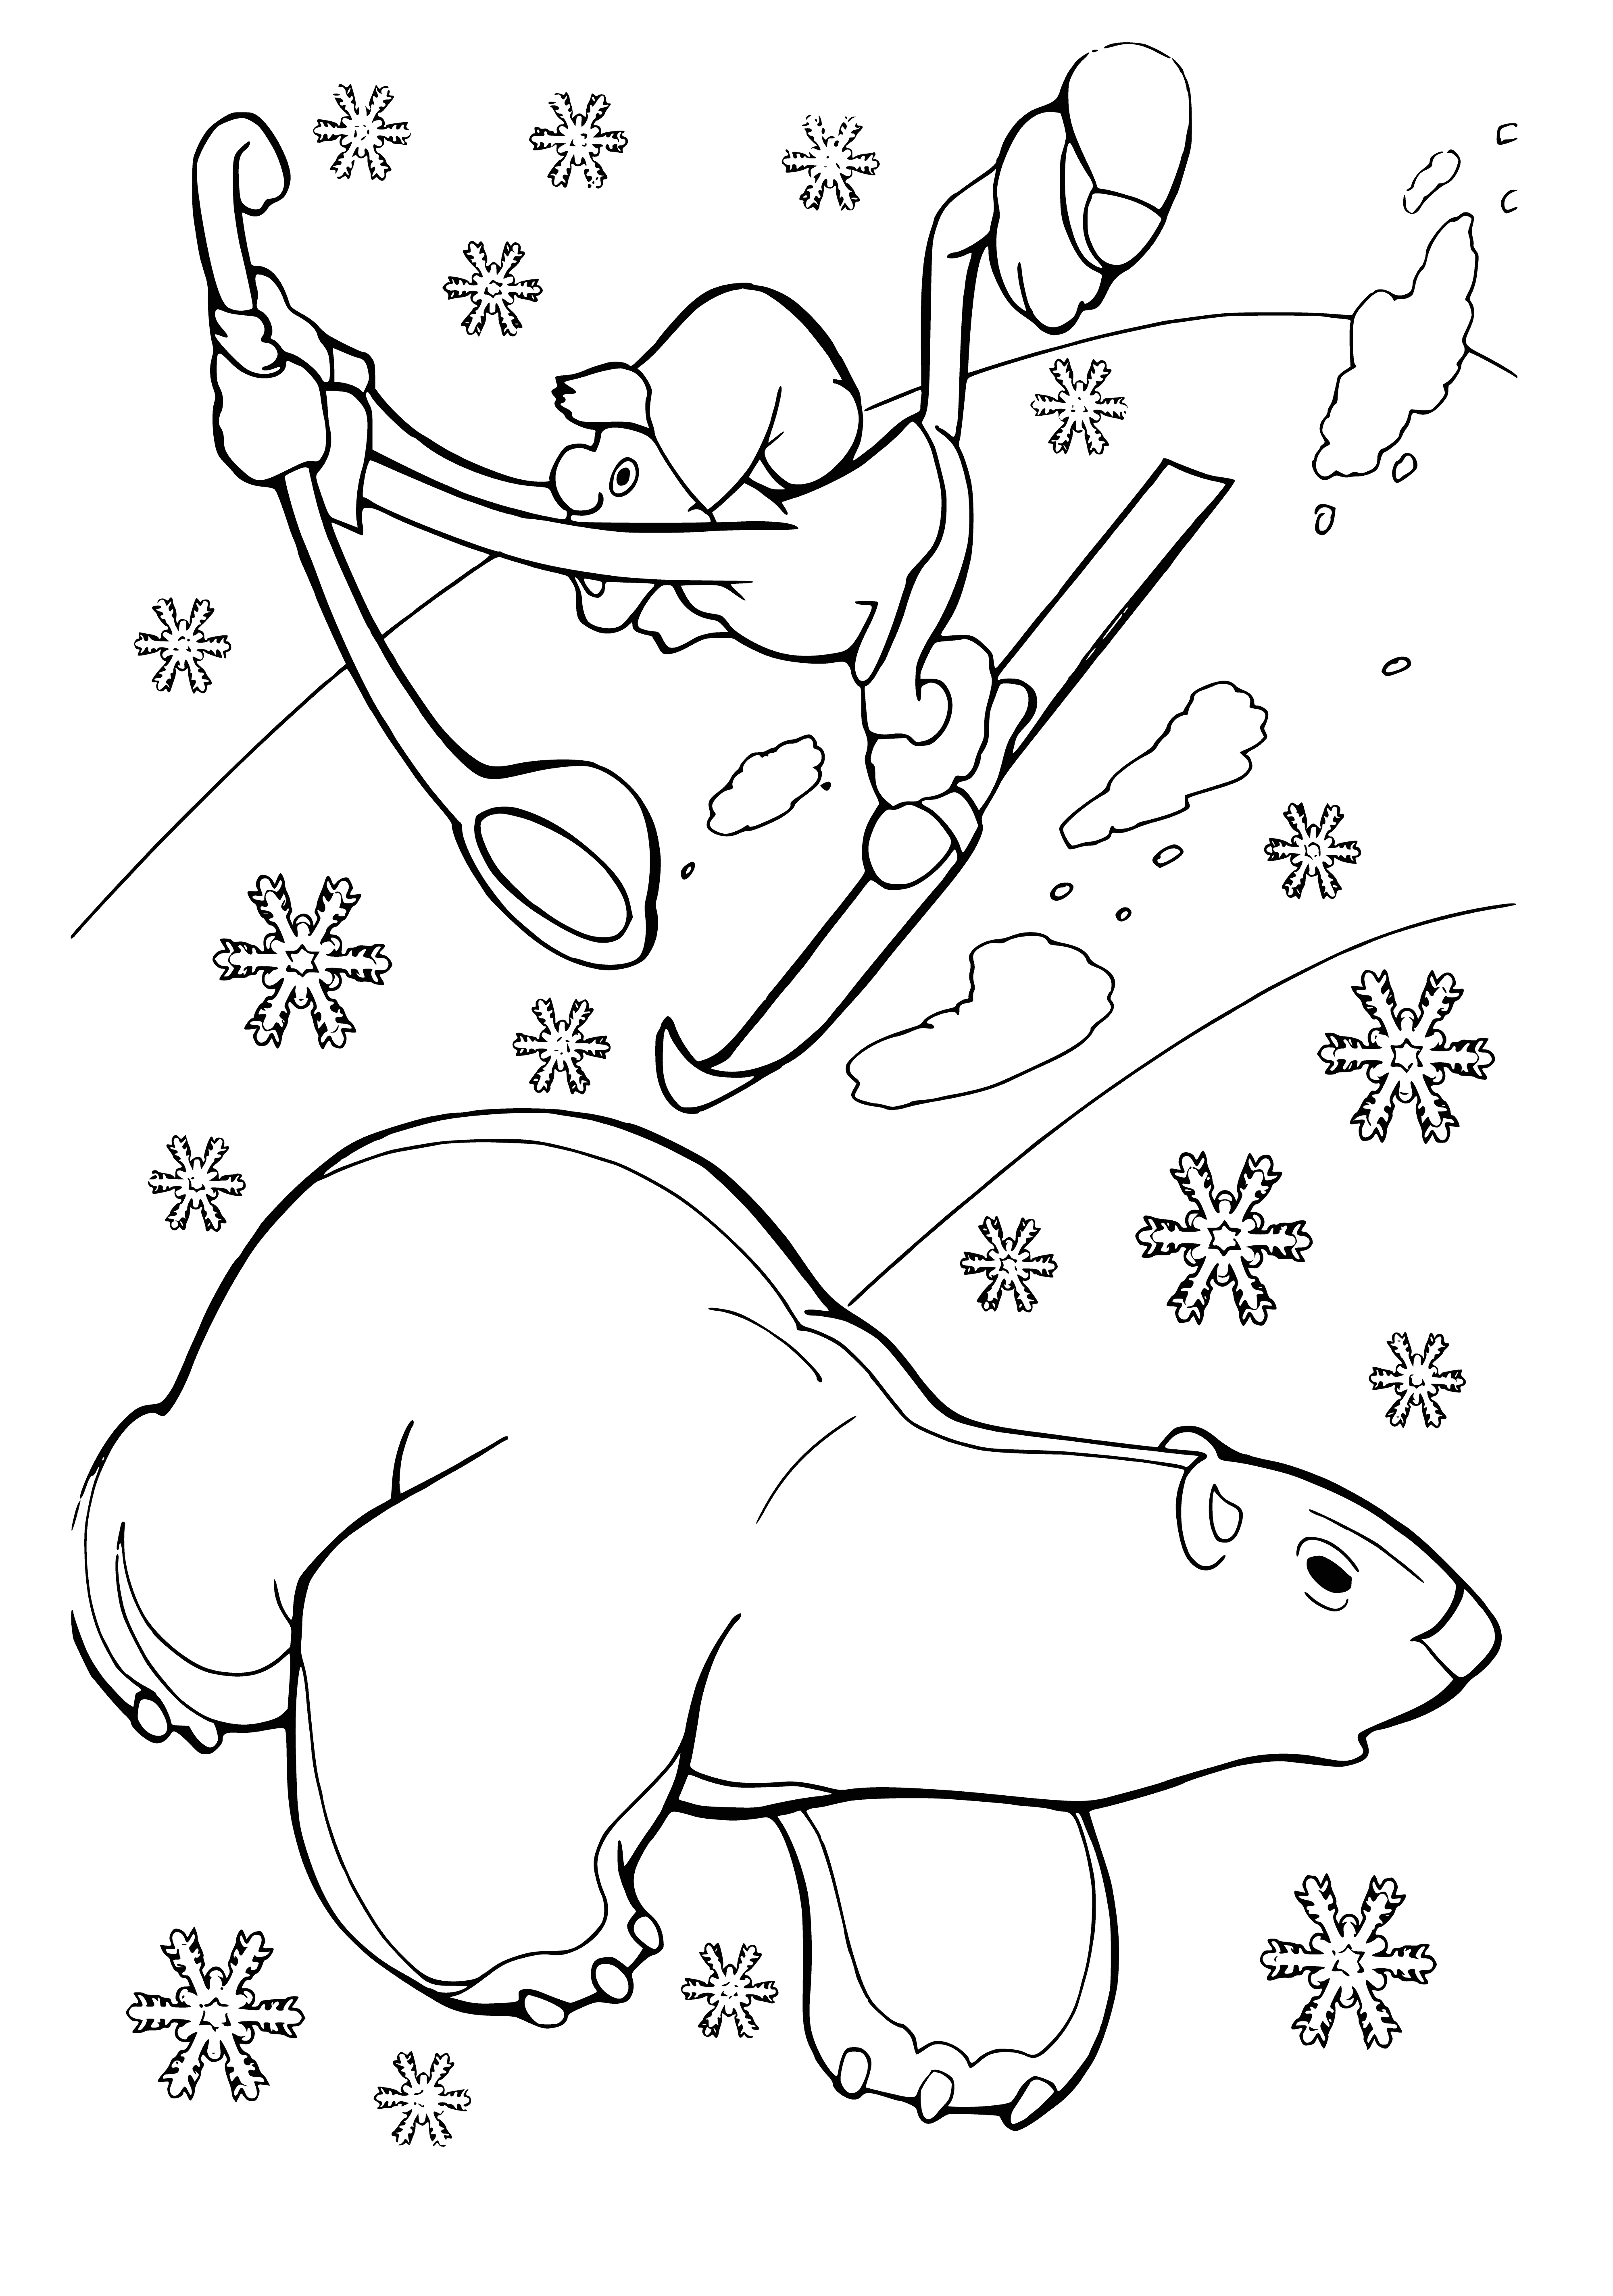 coloring page: Mother bear & cub play in meadow, both happy & enjoying each other’s company. Mother large & brown, cub small & brown.